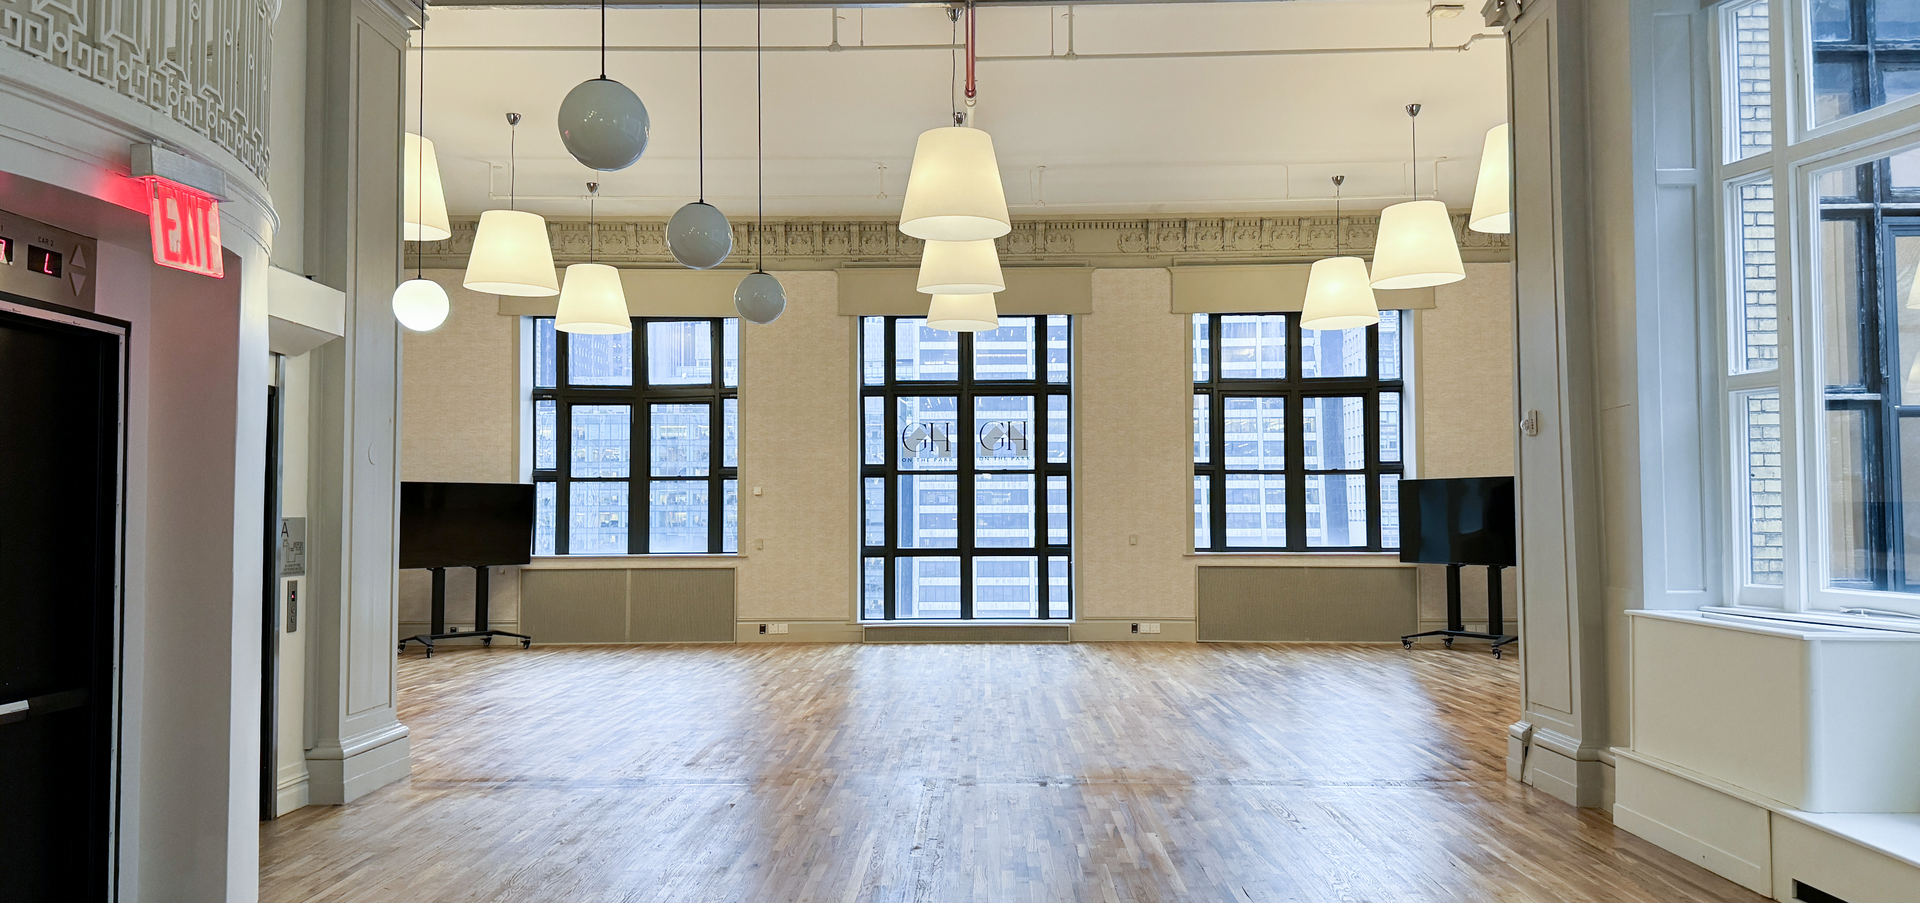 a large empty room with lots of windows and lamps hanging from the ceiling .